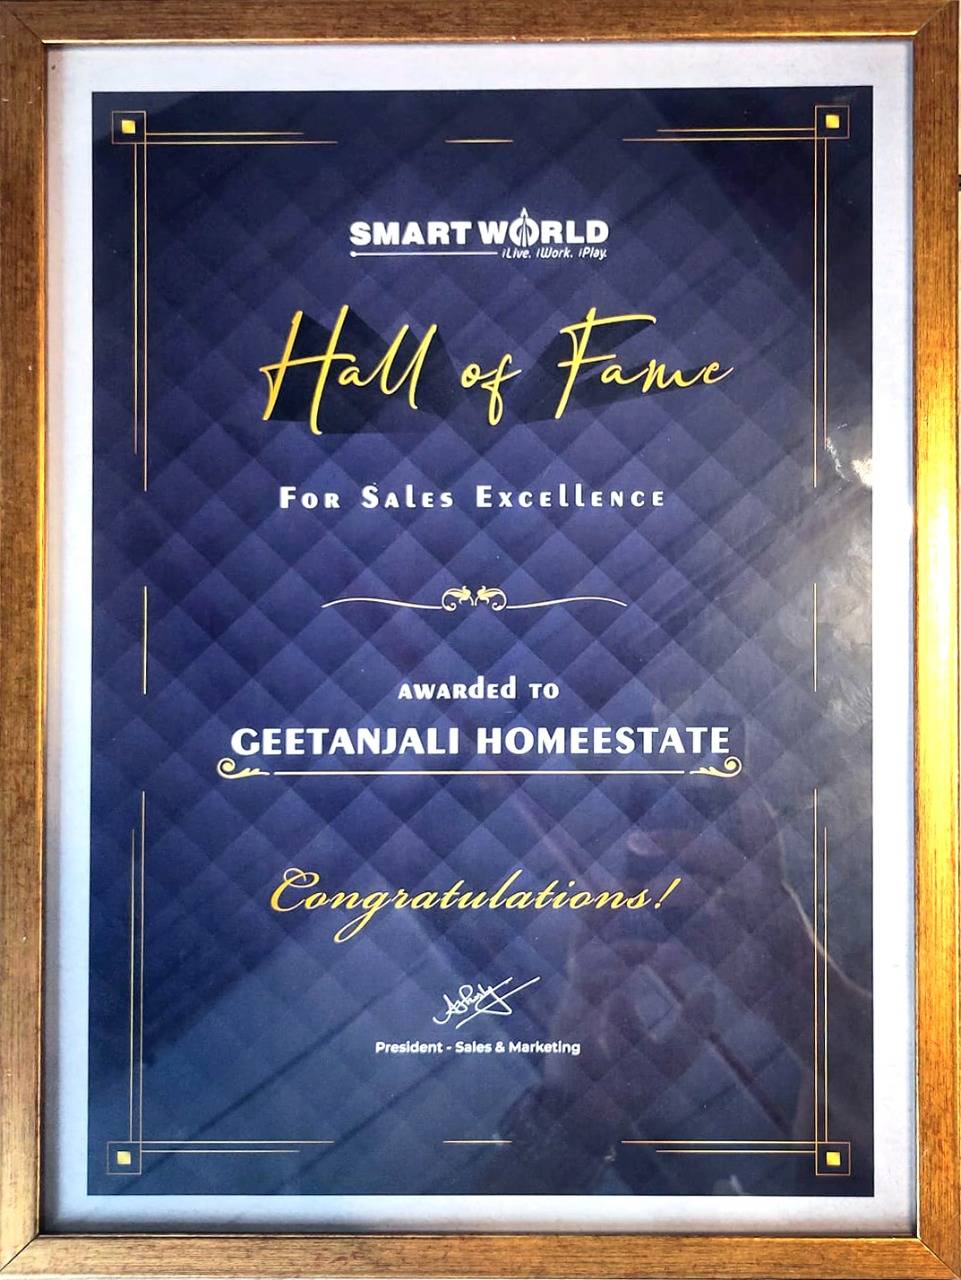 Certificate of Sale Excellence - Smart World